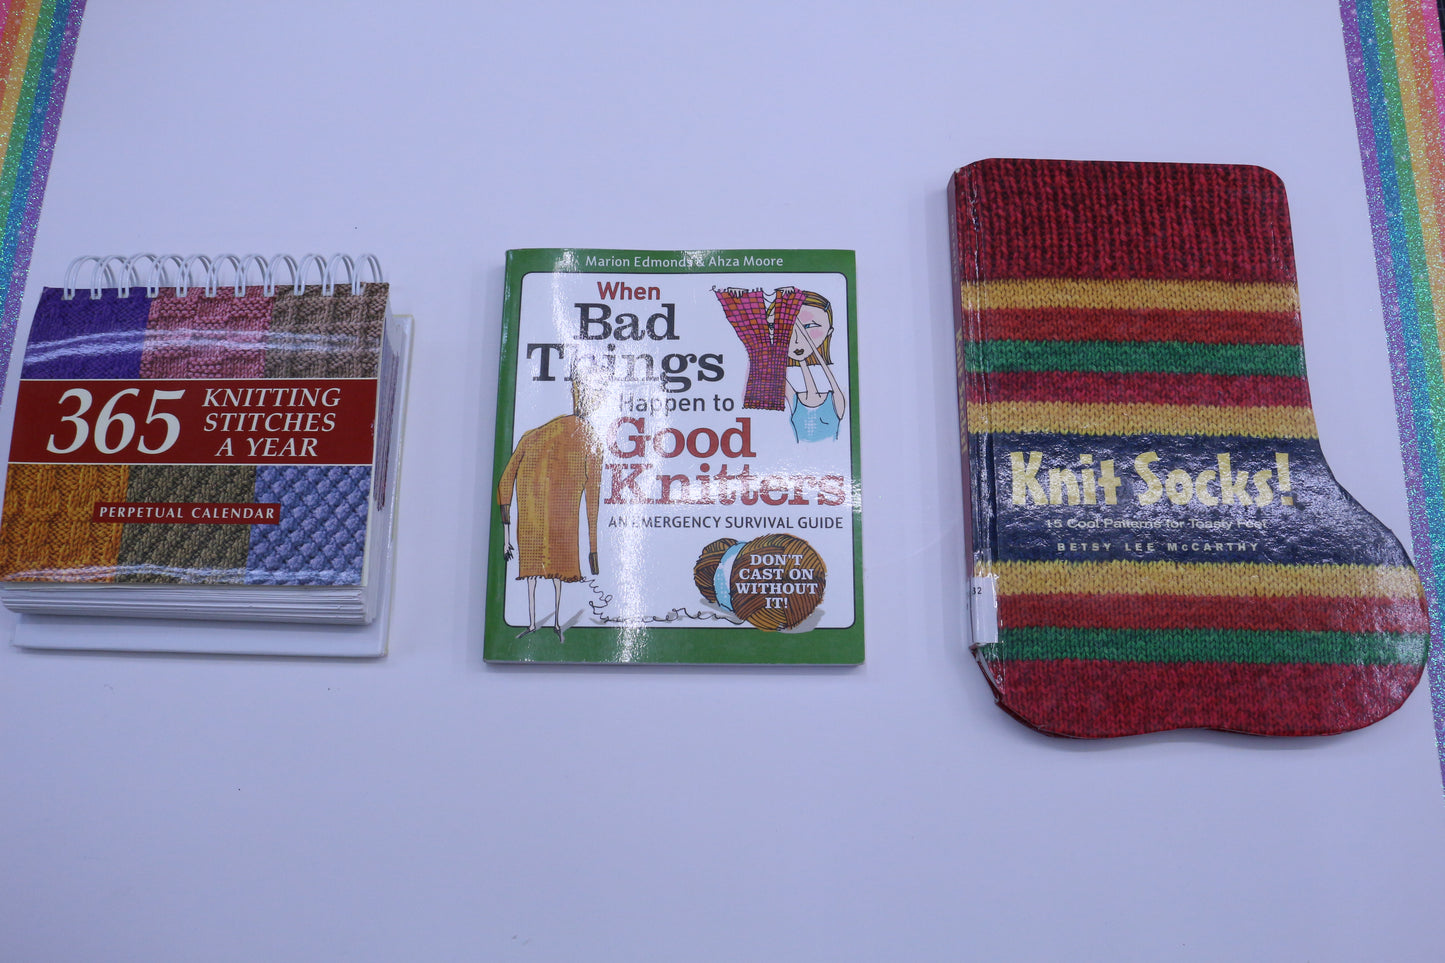 365 Knitting Stitches for a Year or When bad things happen to good knitters or Knit Socks